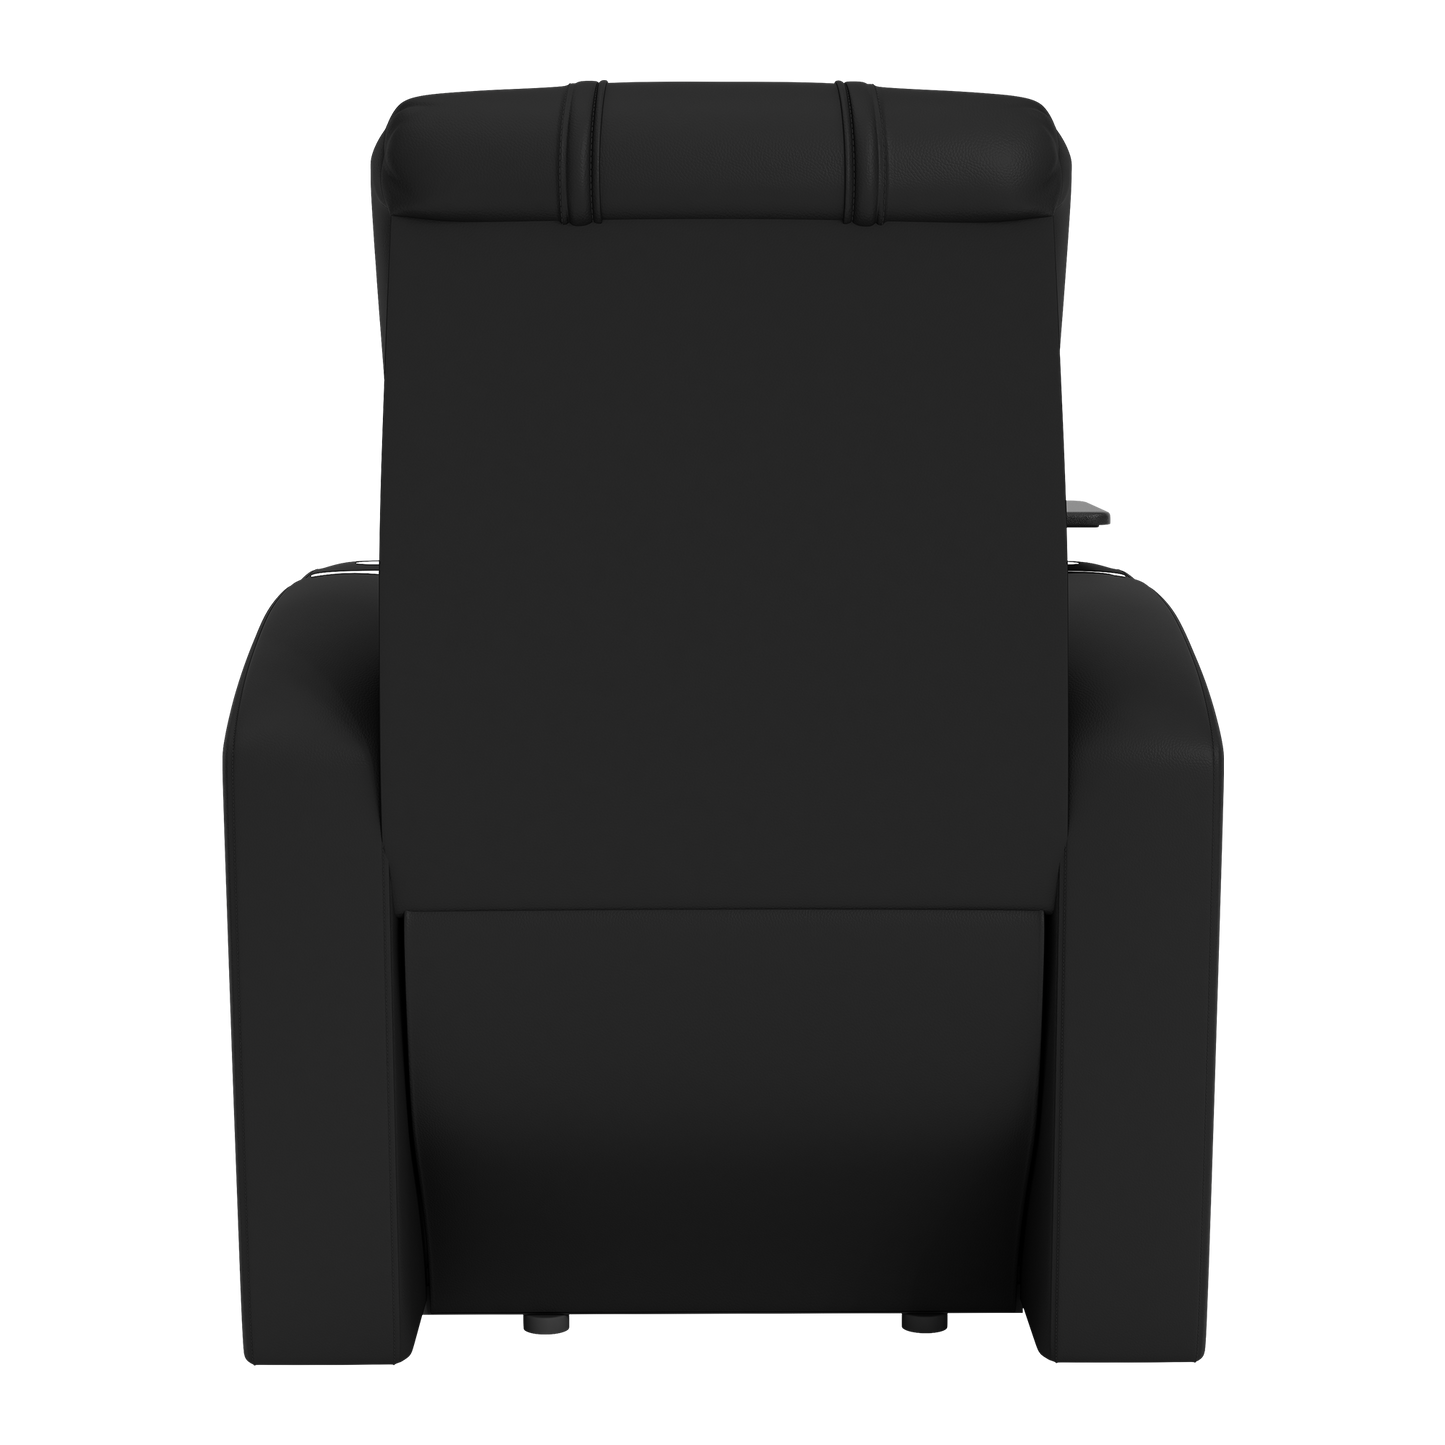 Stealth Power Plus Recliner with Chevrolet Alternate Logo